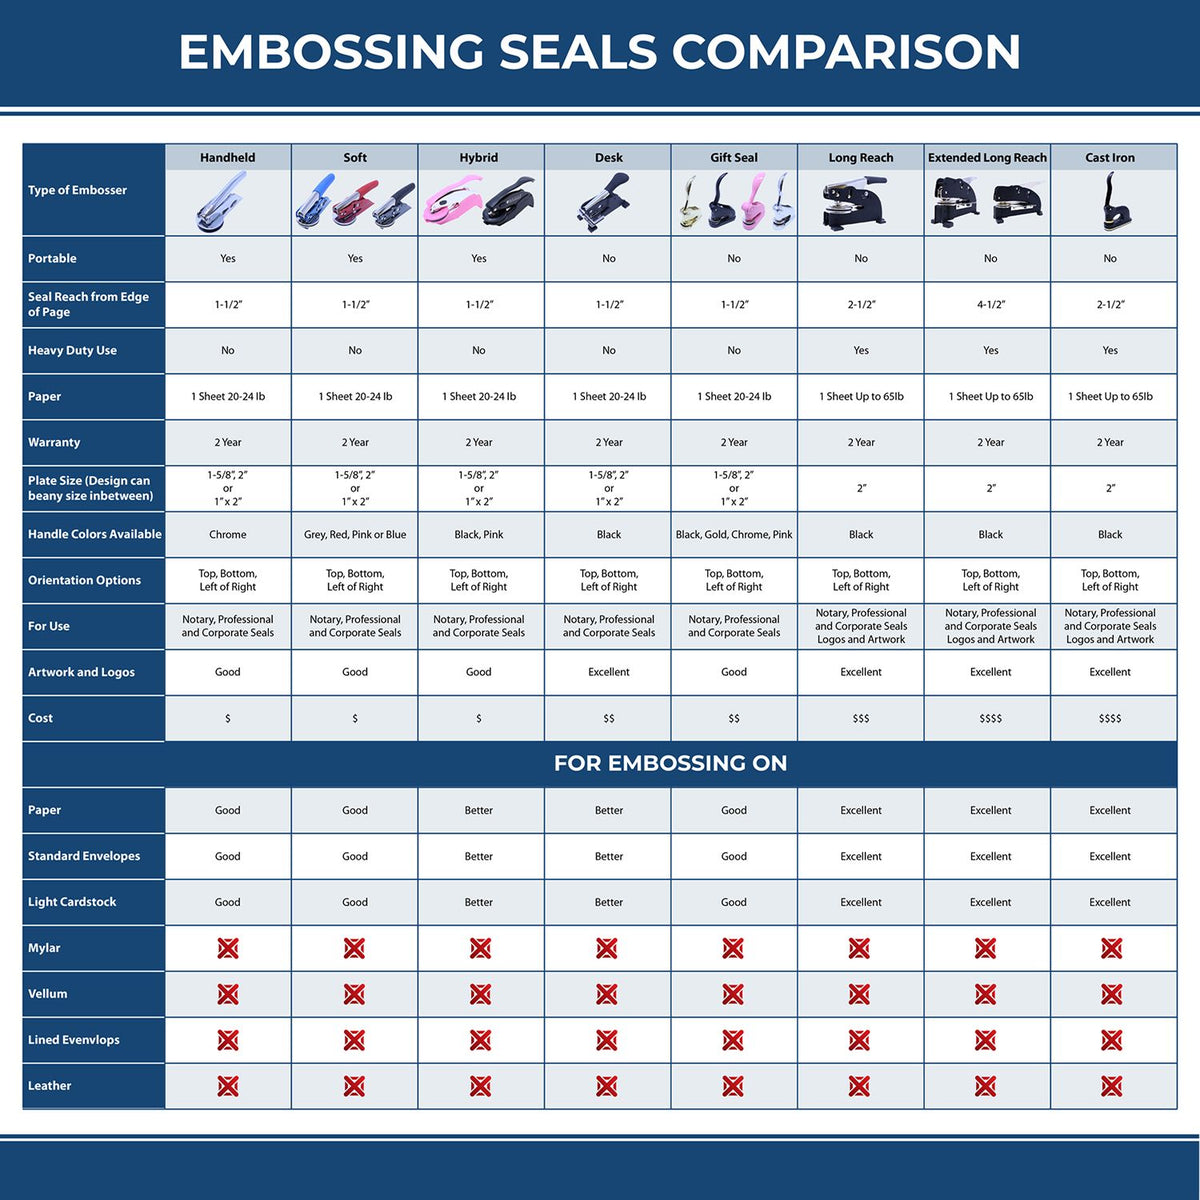 A comparison chart for the different types of mount models available for the Heavy Duty Cast Iron Georgia Geologist Seal Embosser